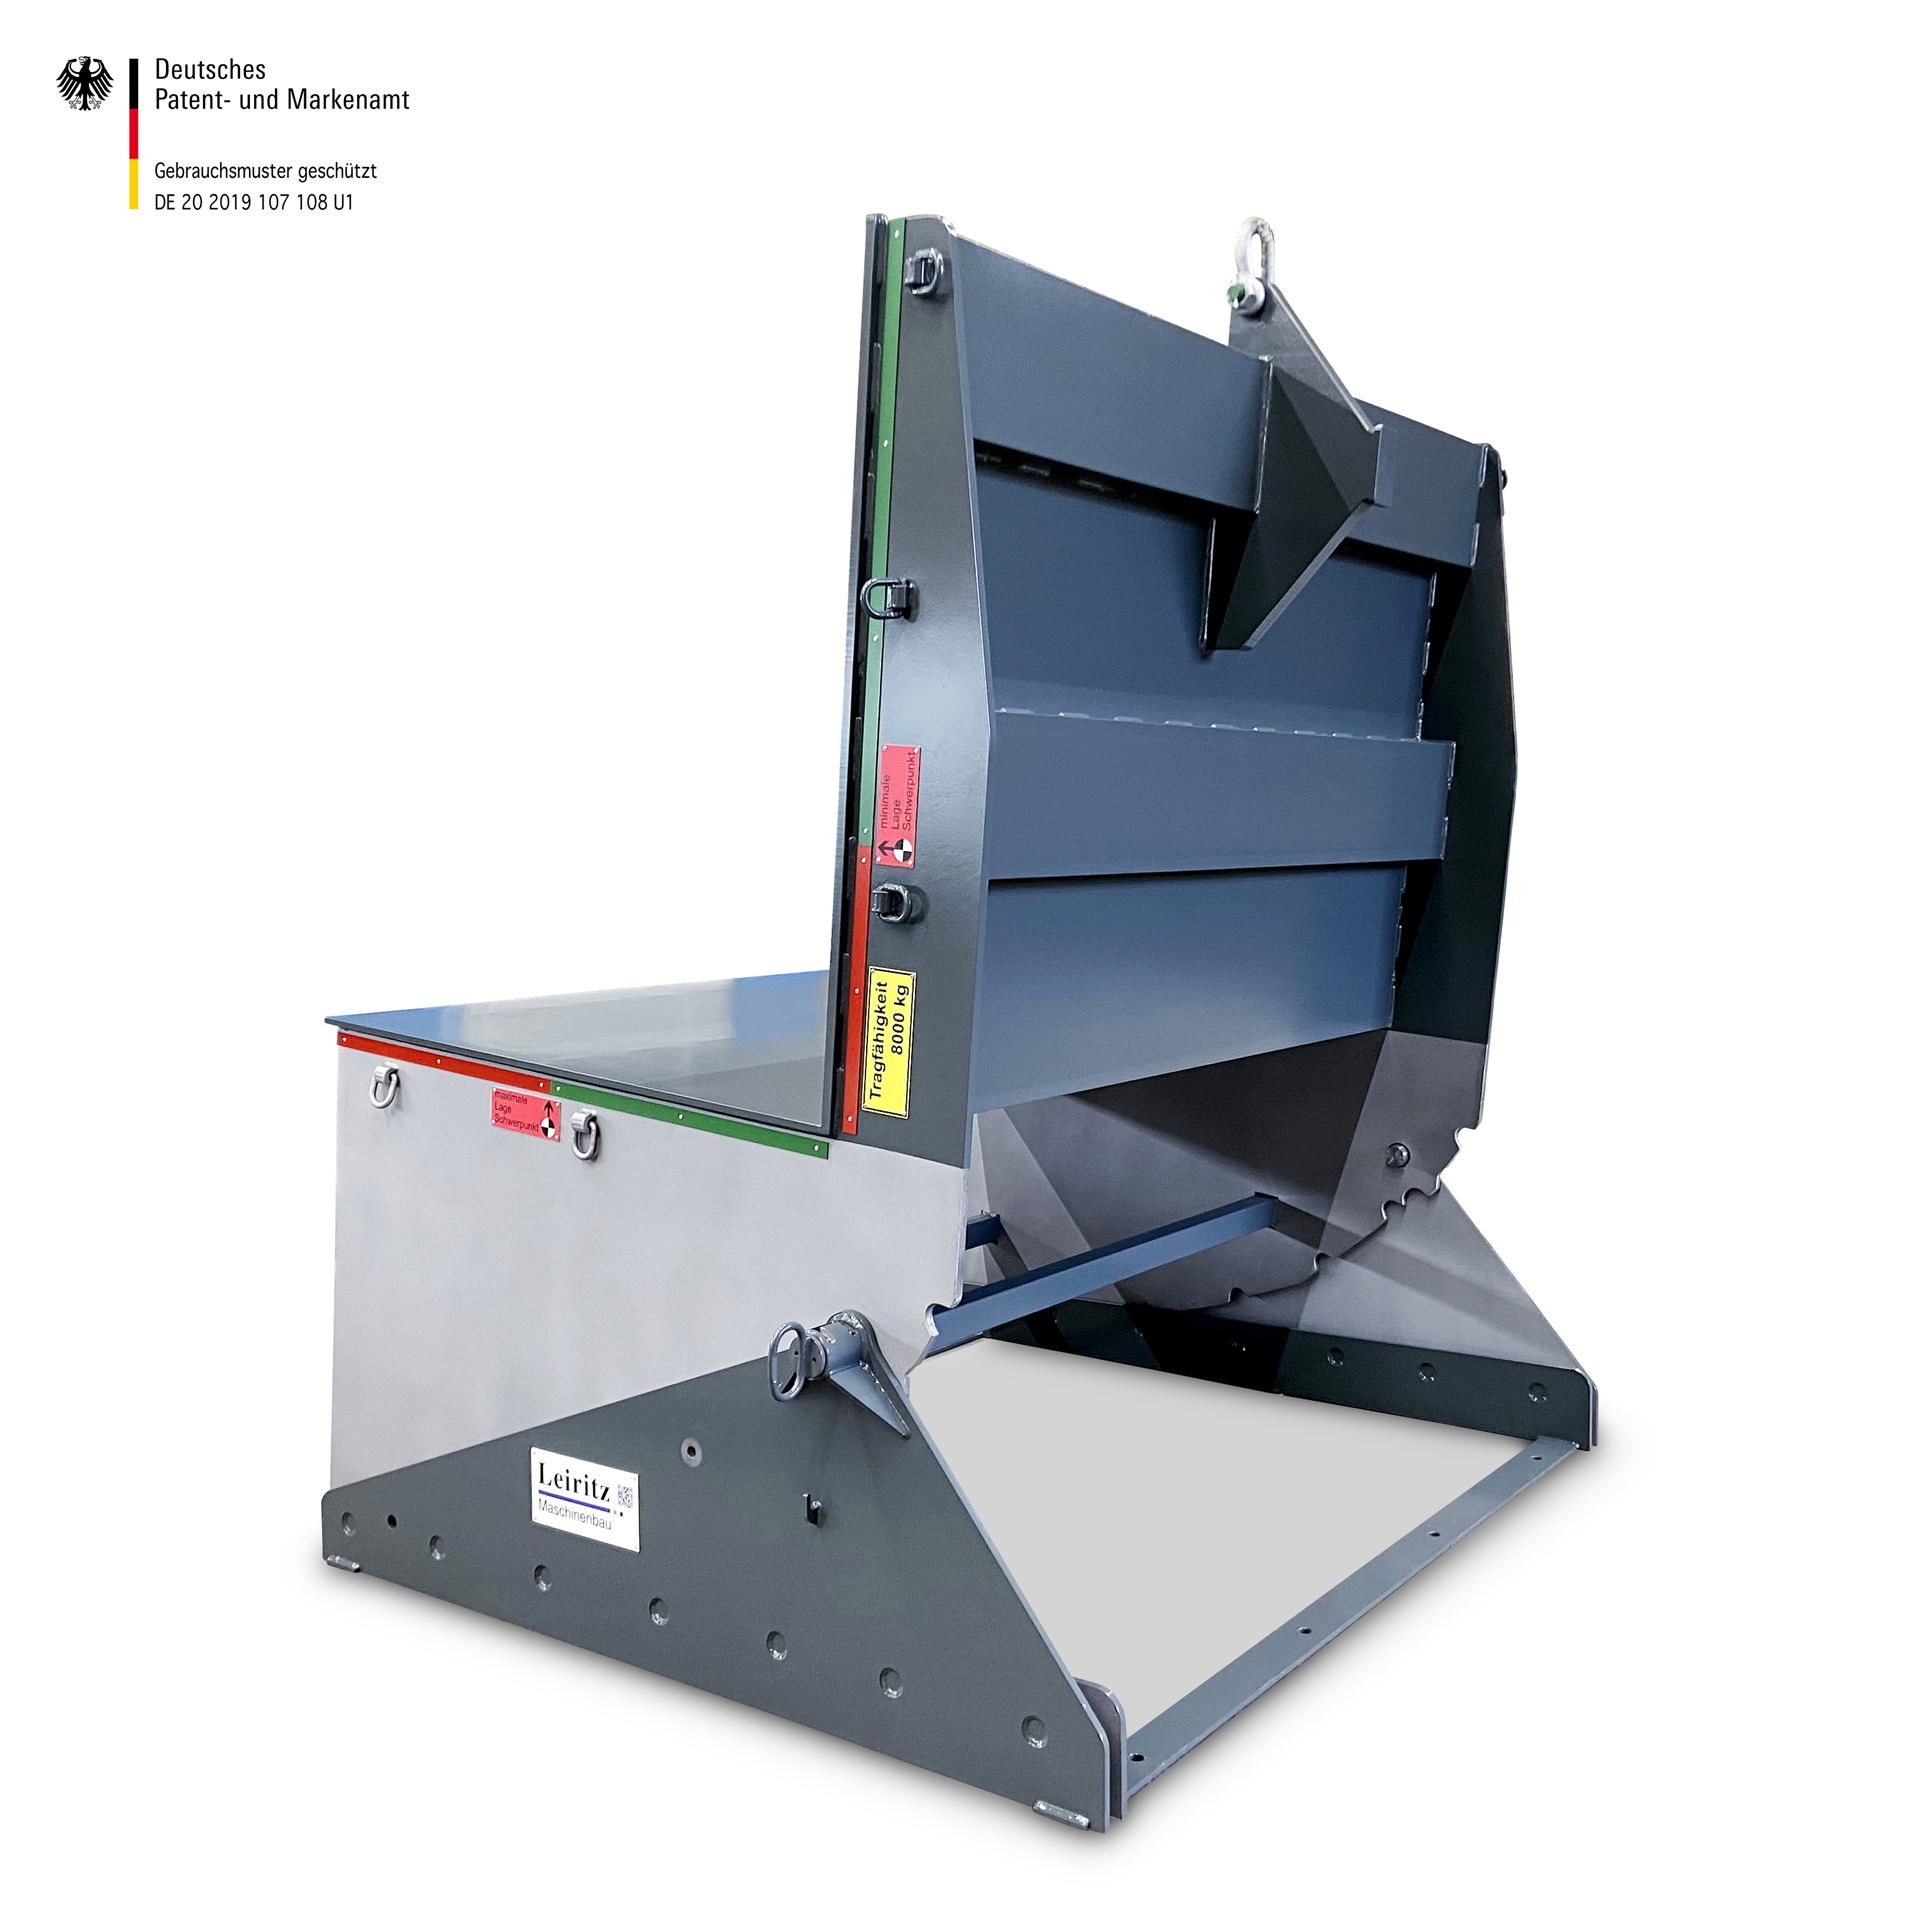 Toolmover and Turnover Device from Leiritz.